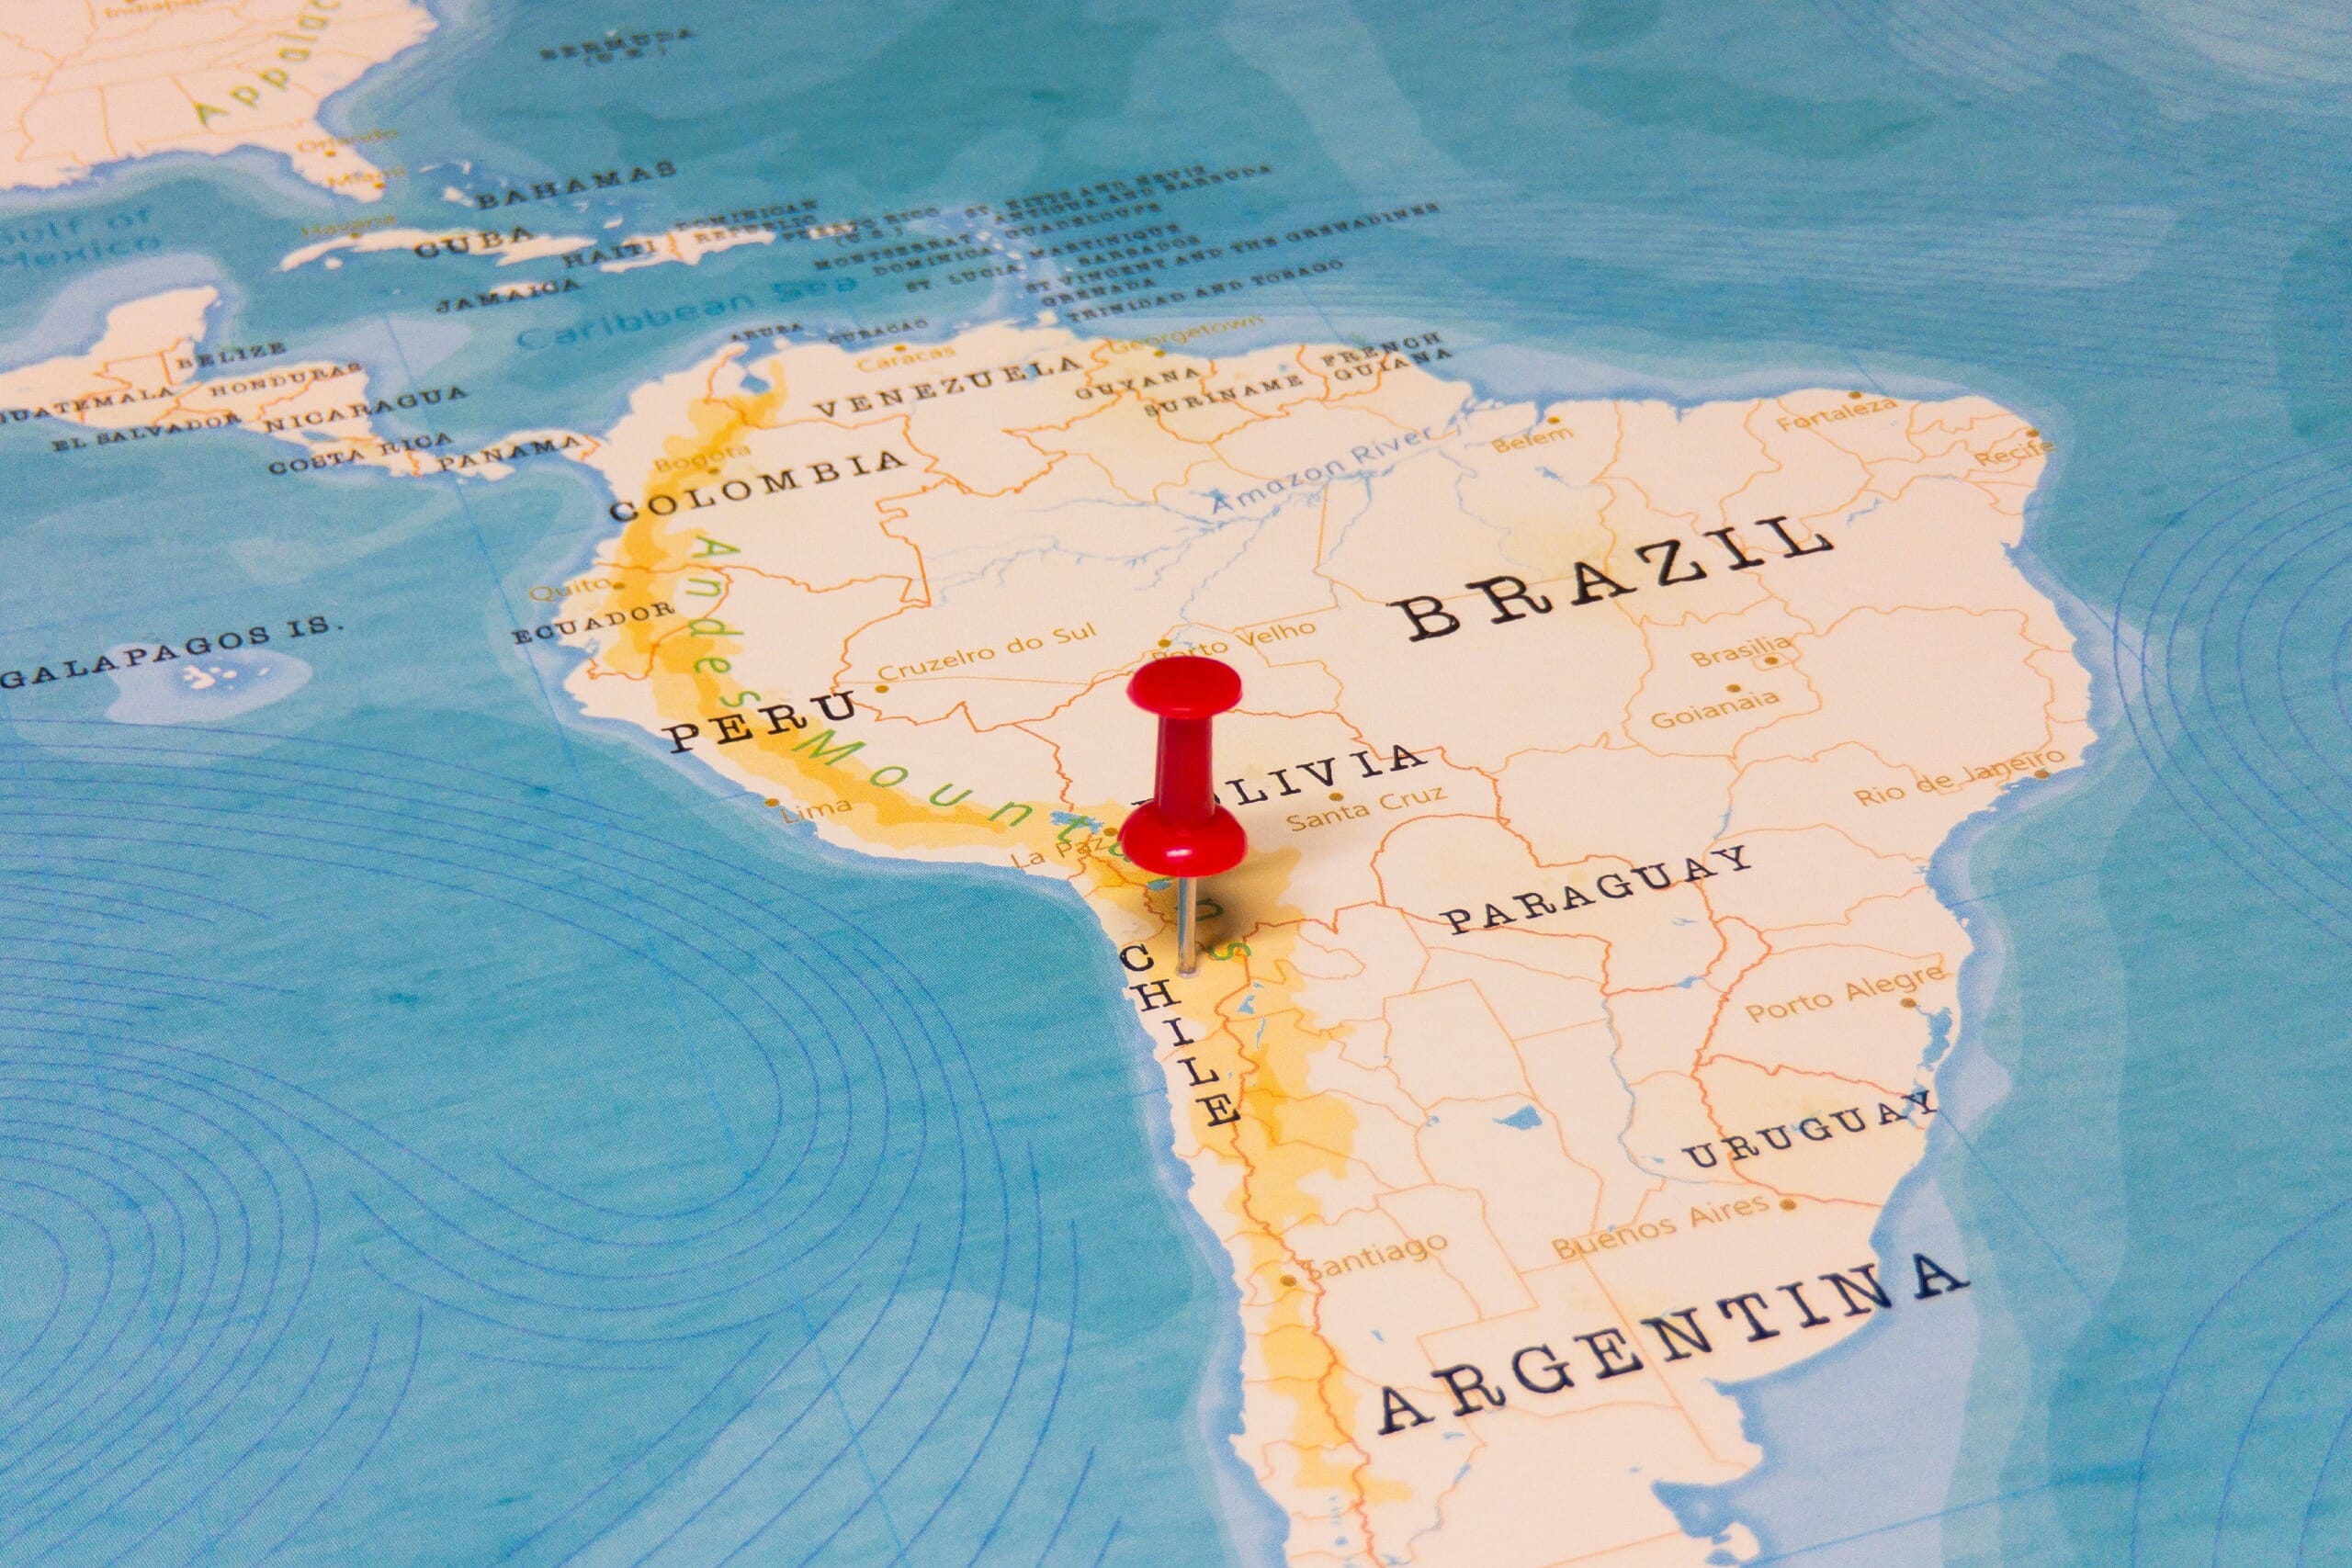 Pin on Maps of South America